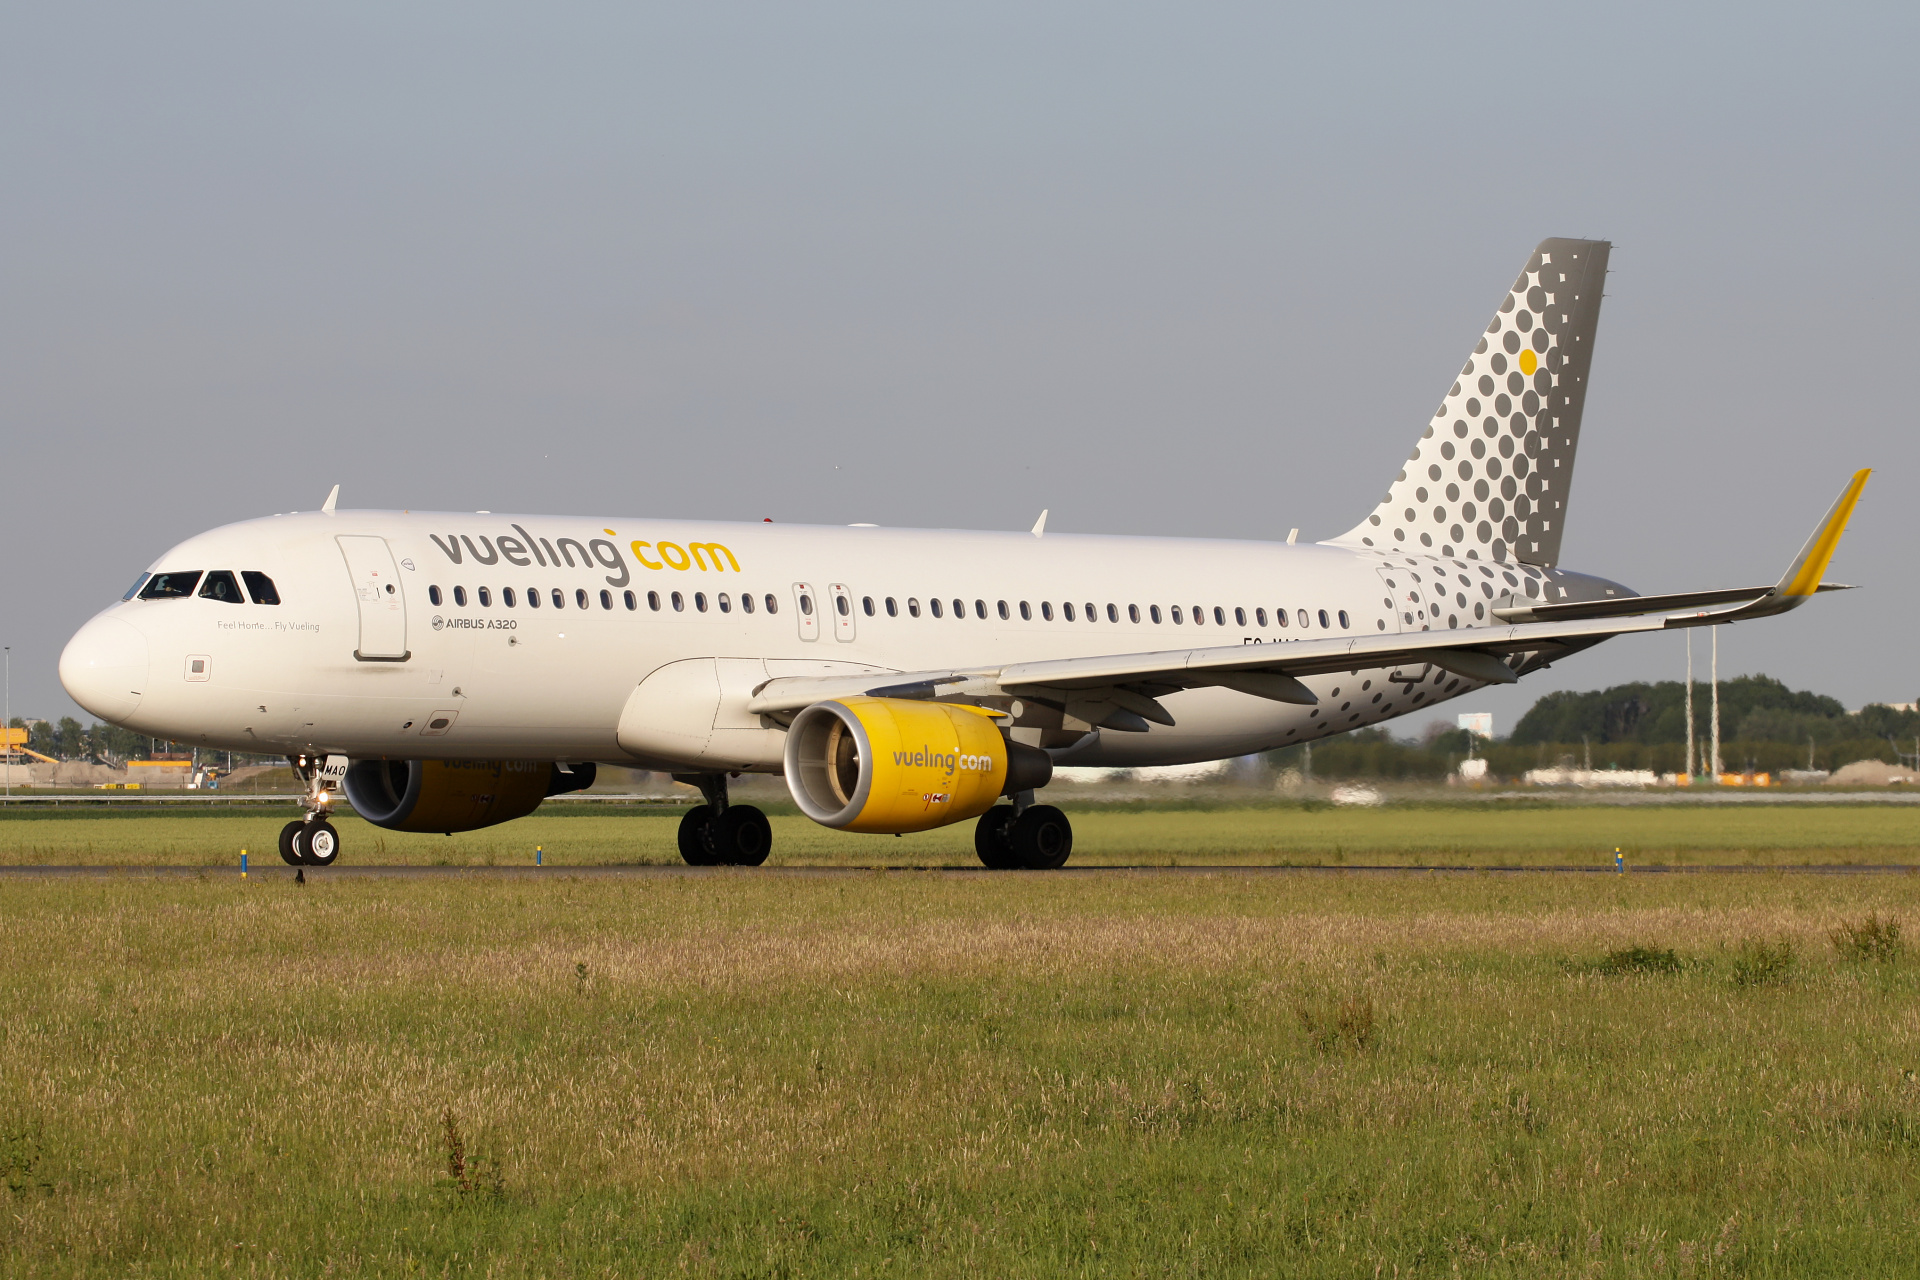 EC-MAO (Aircraft » Schiphol Spotting » Airbus A320-200 » Vueling Airlines)